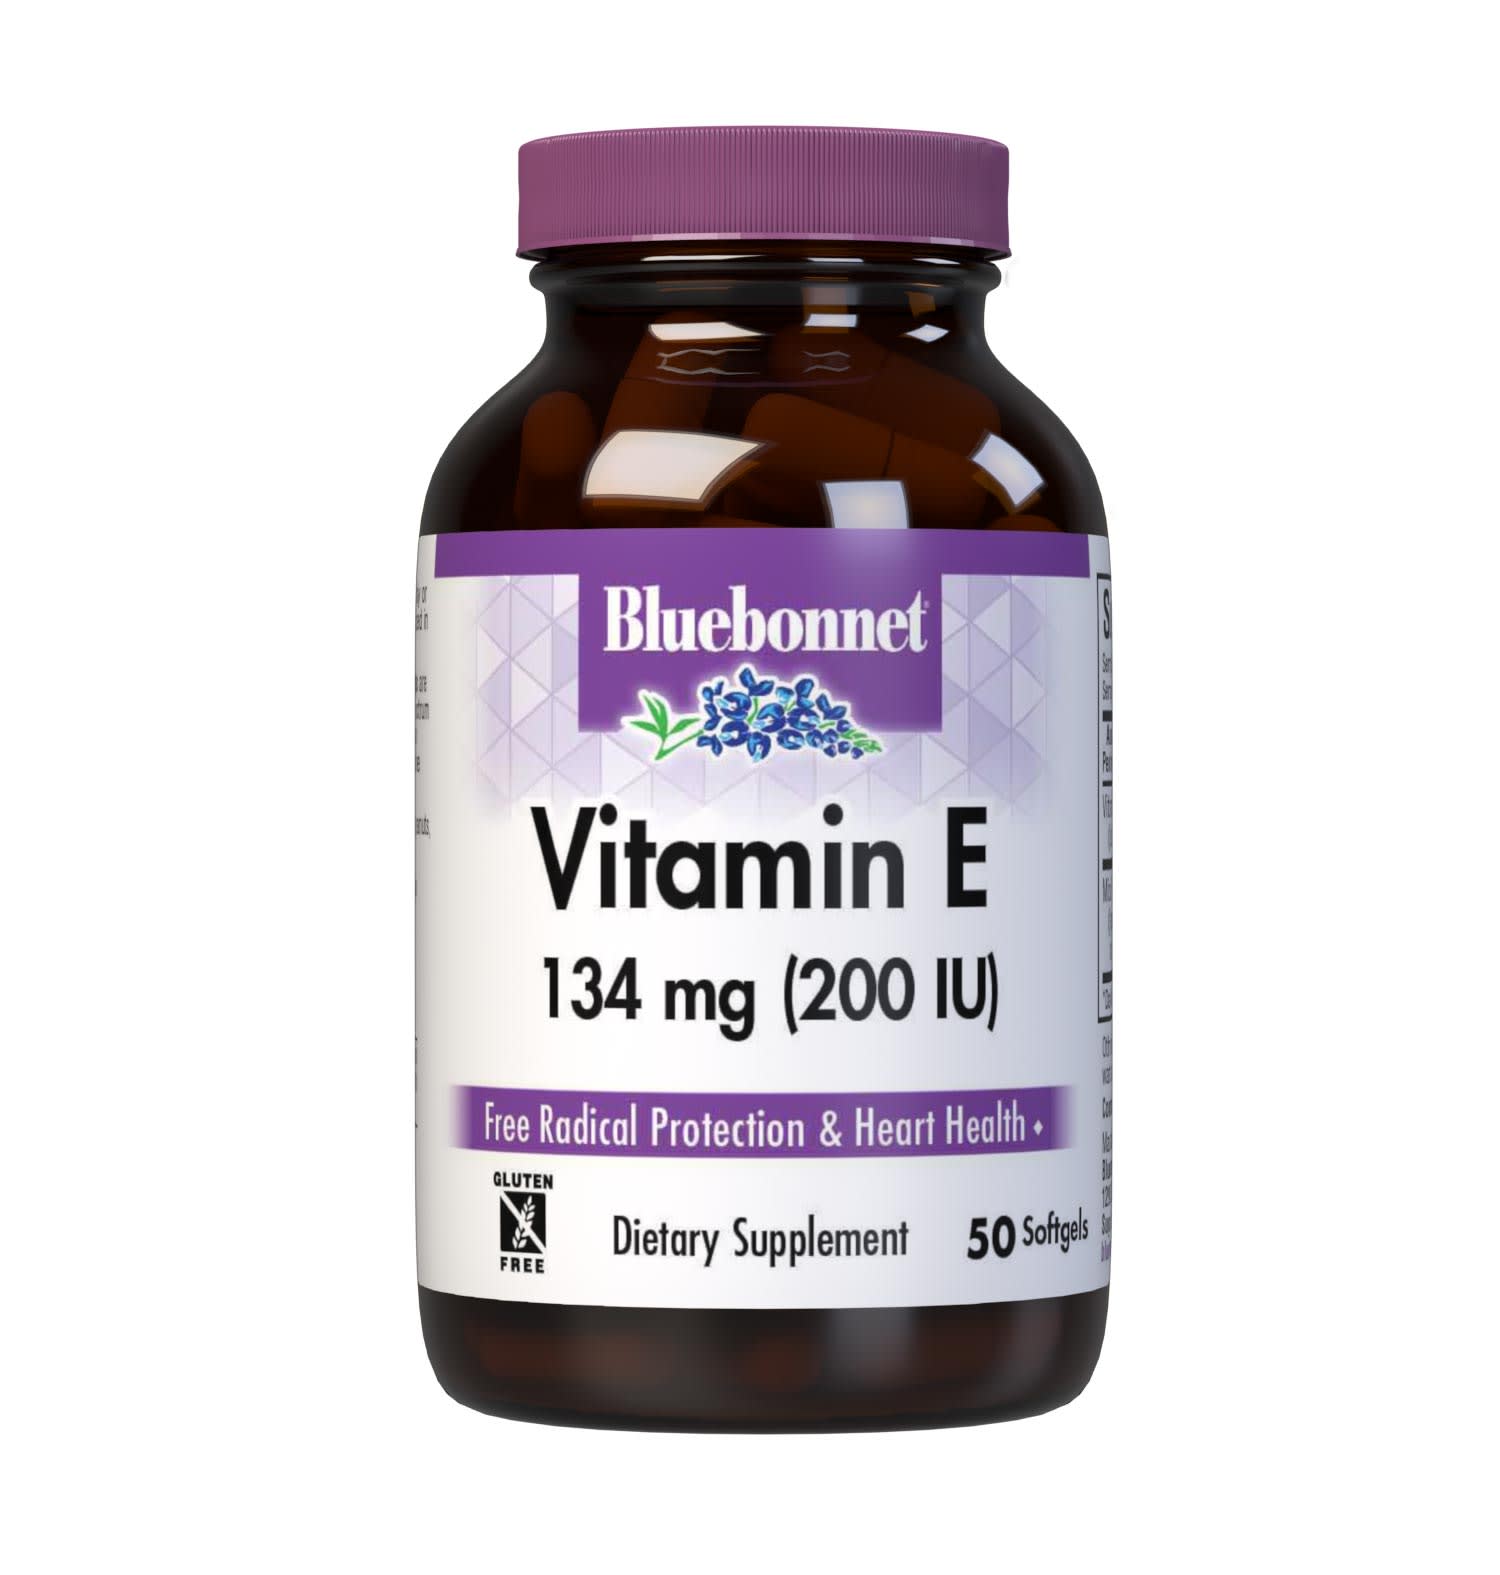 Bluebonnet’s Vitamin E 200 lU (134 mg) Mixed Softgels are specially formulated with d-alpha tocopherol and full spectrum tocopherol isomers (beta, delta and gamma) in a base of vegetable oil. Vitamin E is an antioxidant that provides free radical protection as well as cardiovascular support. #size_50 count